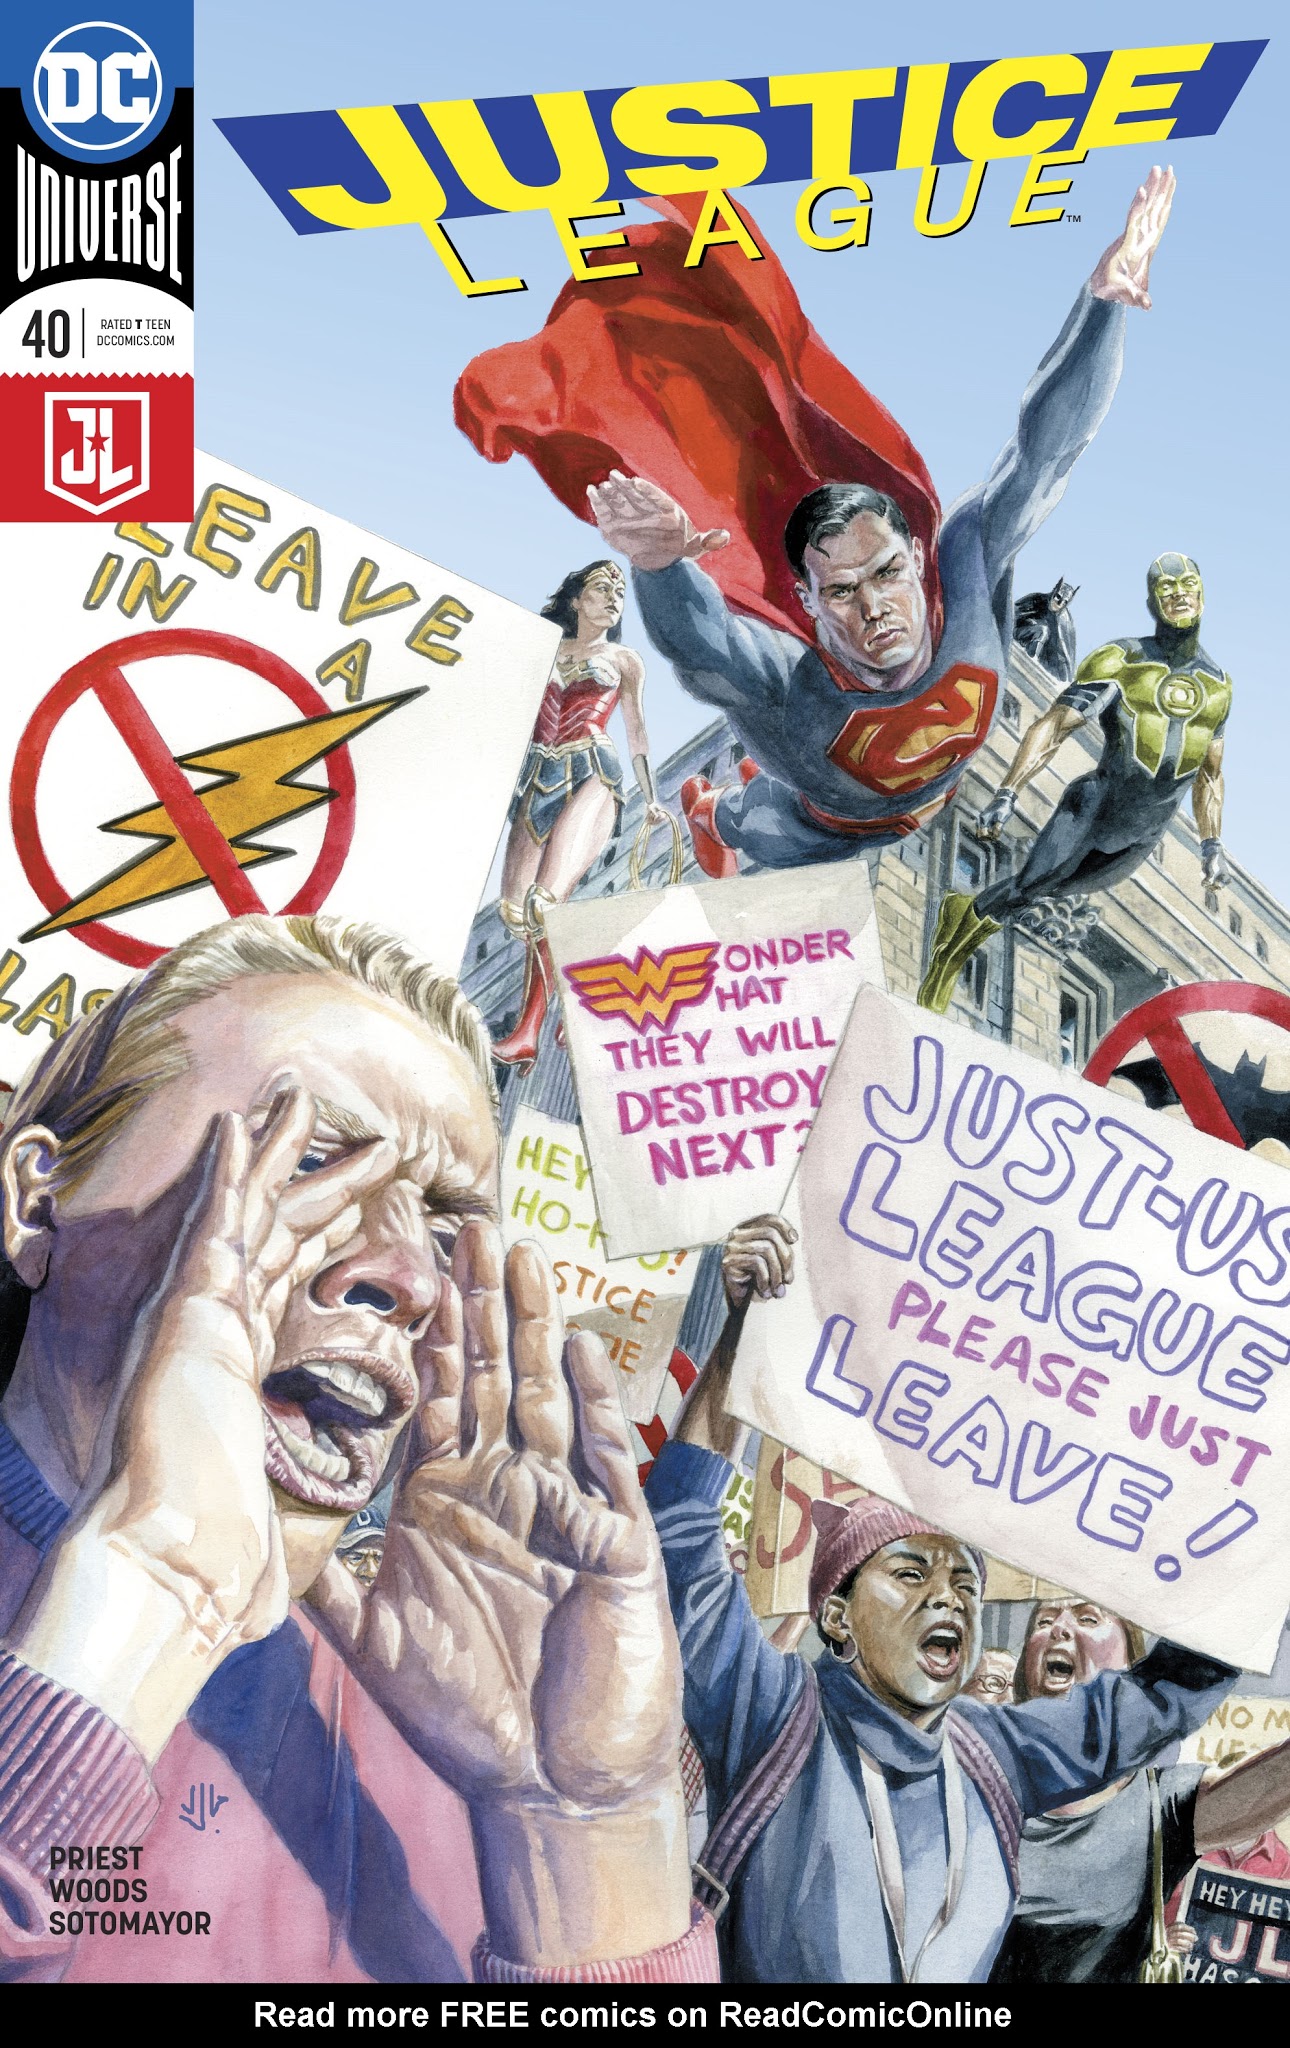 Read online Justice League (2016) comic -  Issue #40 - 3